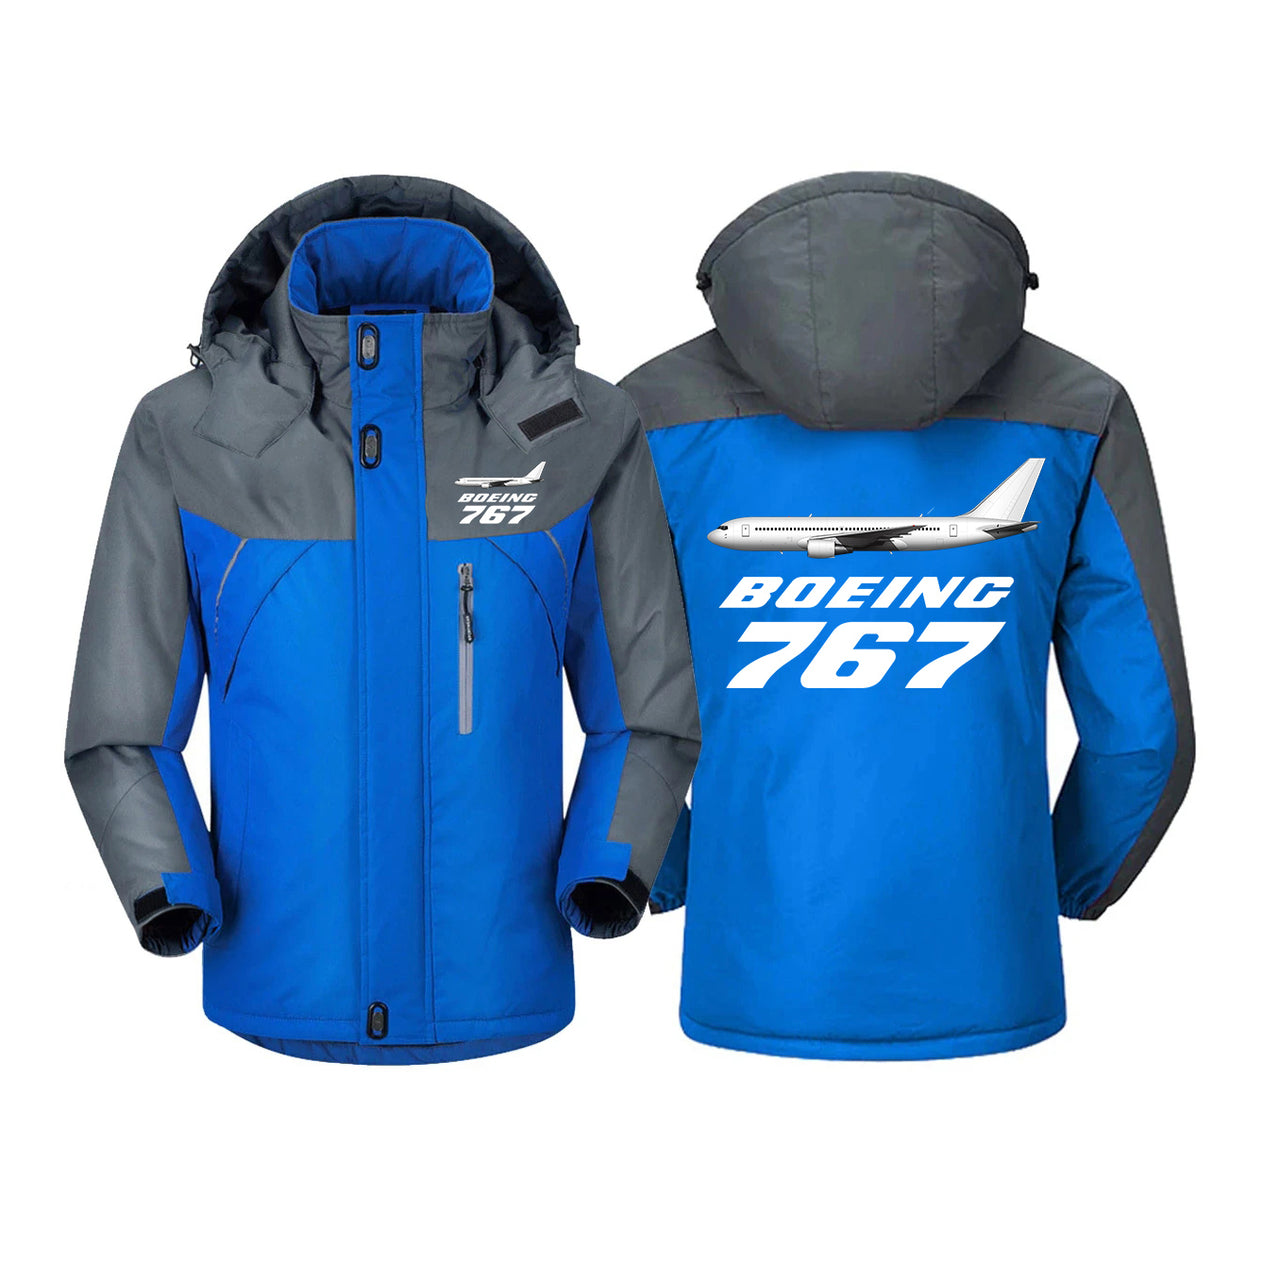 The Boeing 767 Designed Thick Winter Jackets